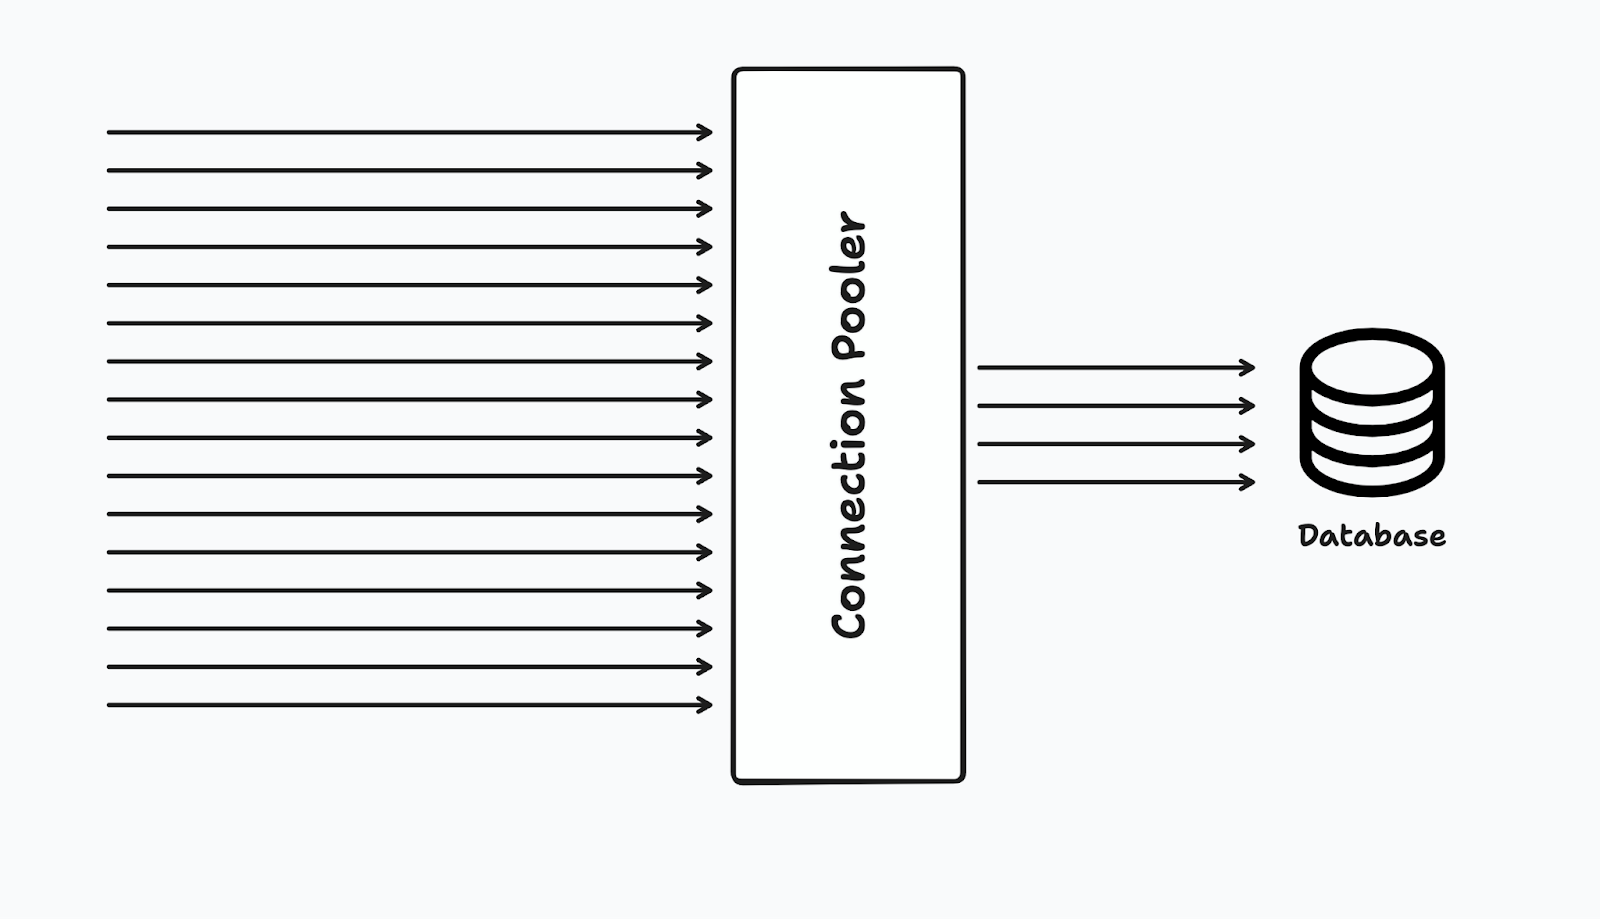 Diagram showing connection pooling. From right to left:

1. Many arrows indicating a large number of connections

2. A rectangle representing the connection pooler with a small number of connections coming out of it

3. A database icon that is receiving the small number of connections